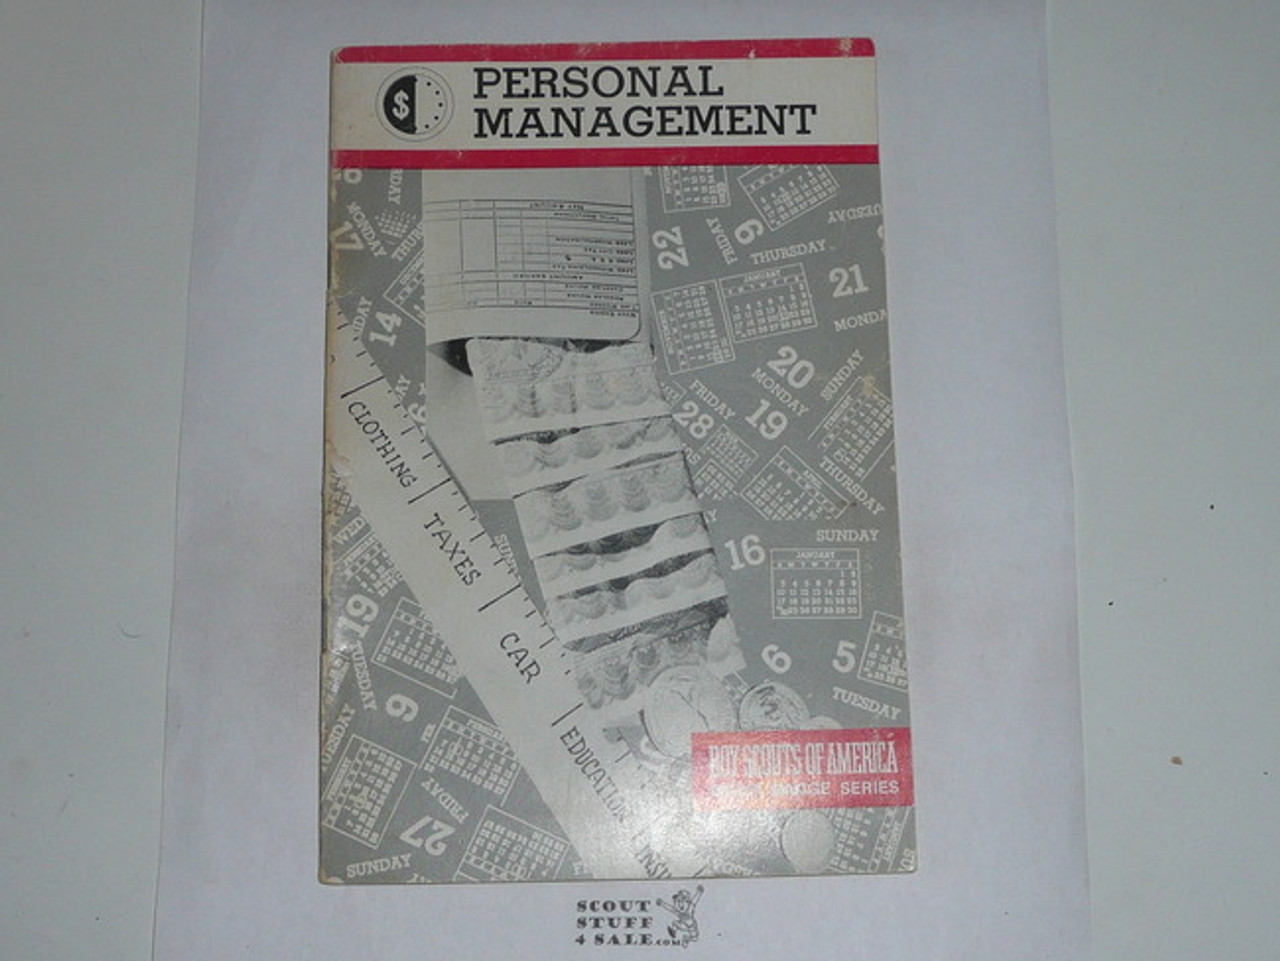 Personal Management Merit Badge Pamphlet, Type 9, Red Band Cover, 1-82 Printing